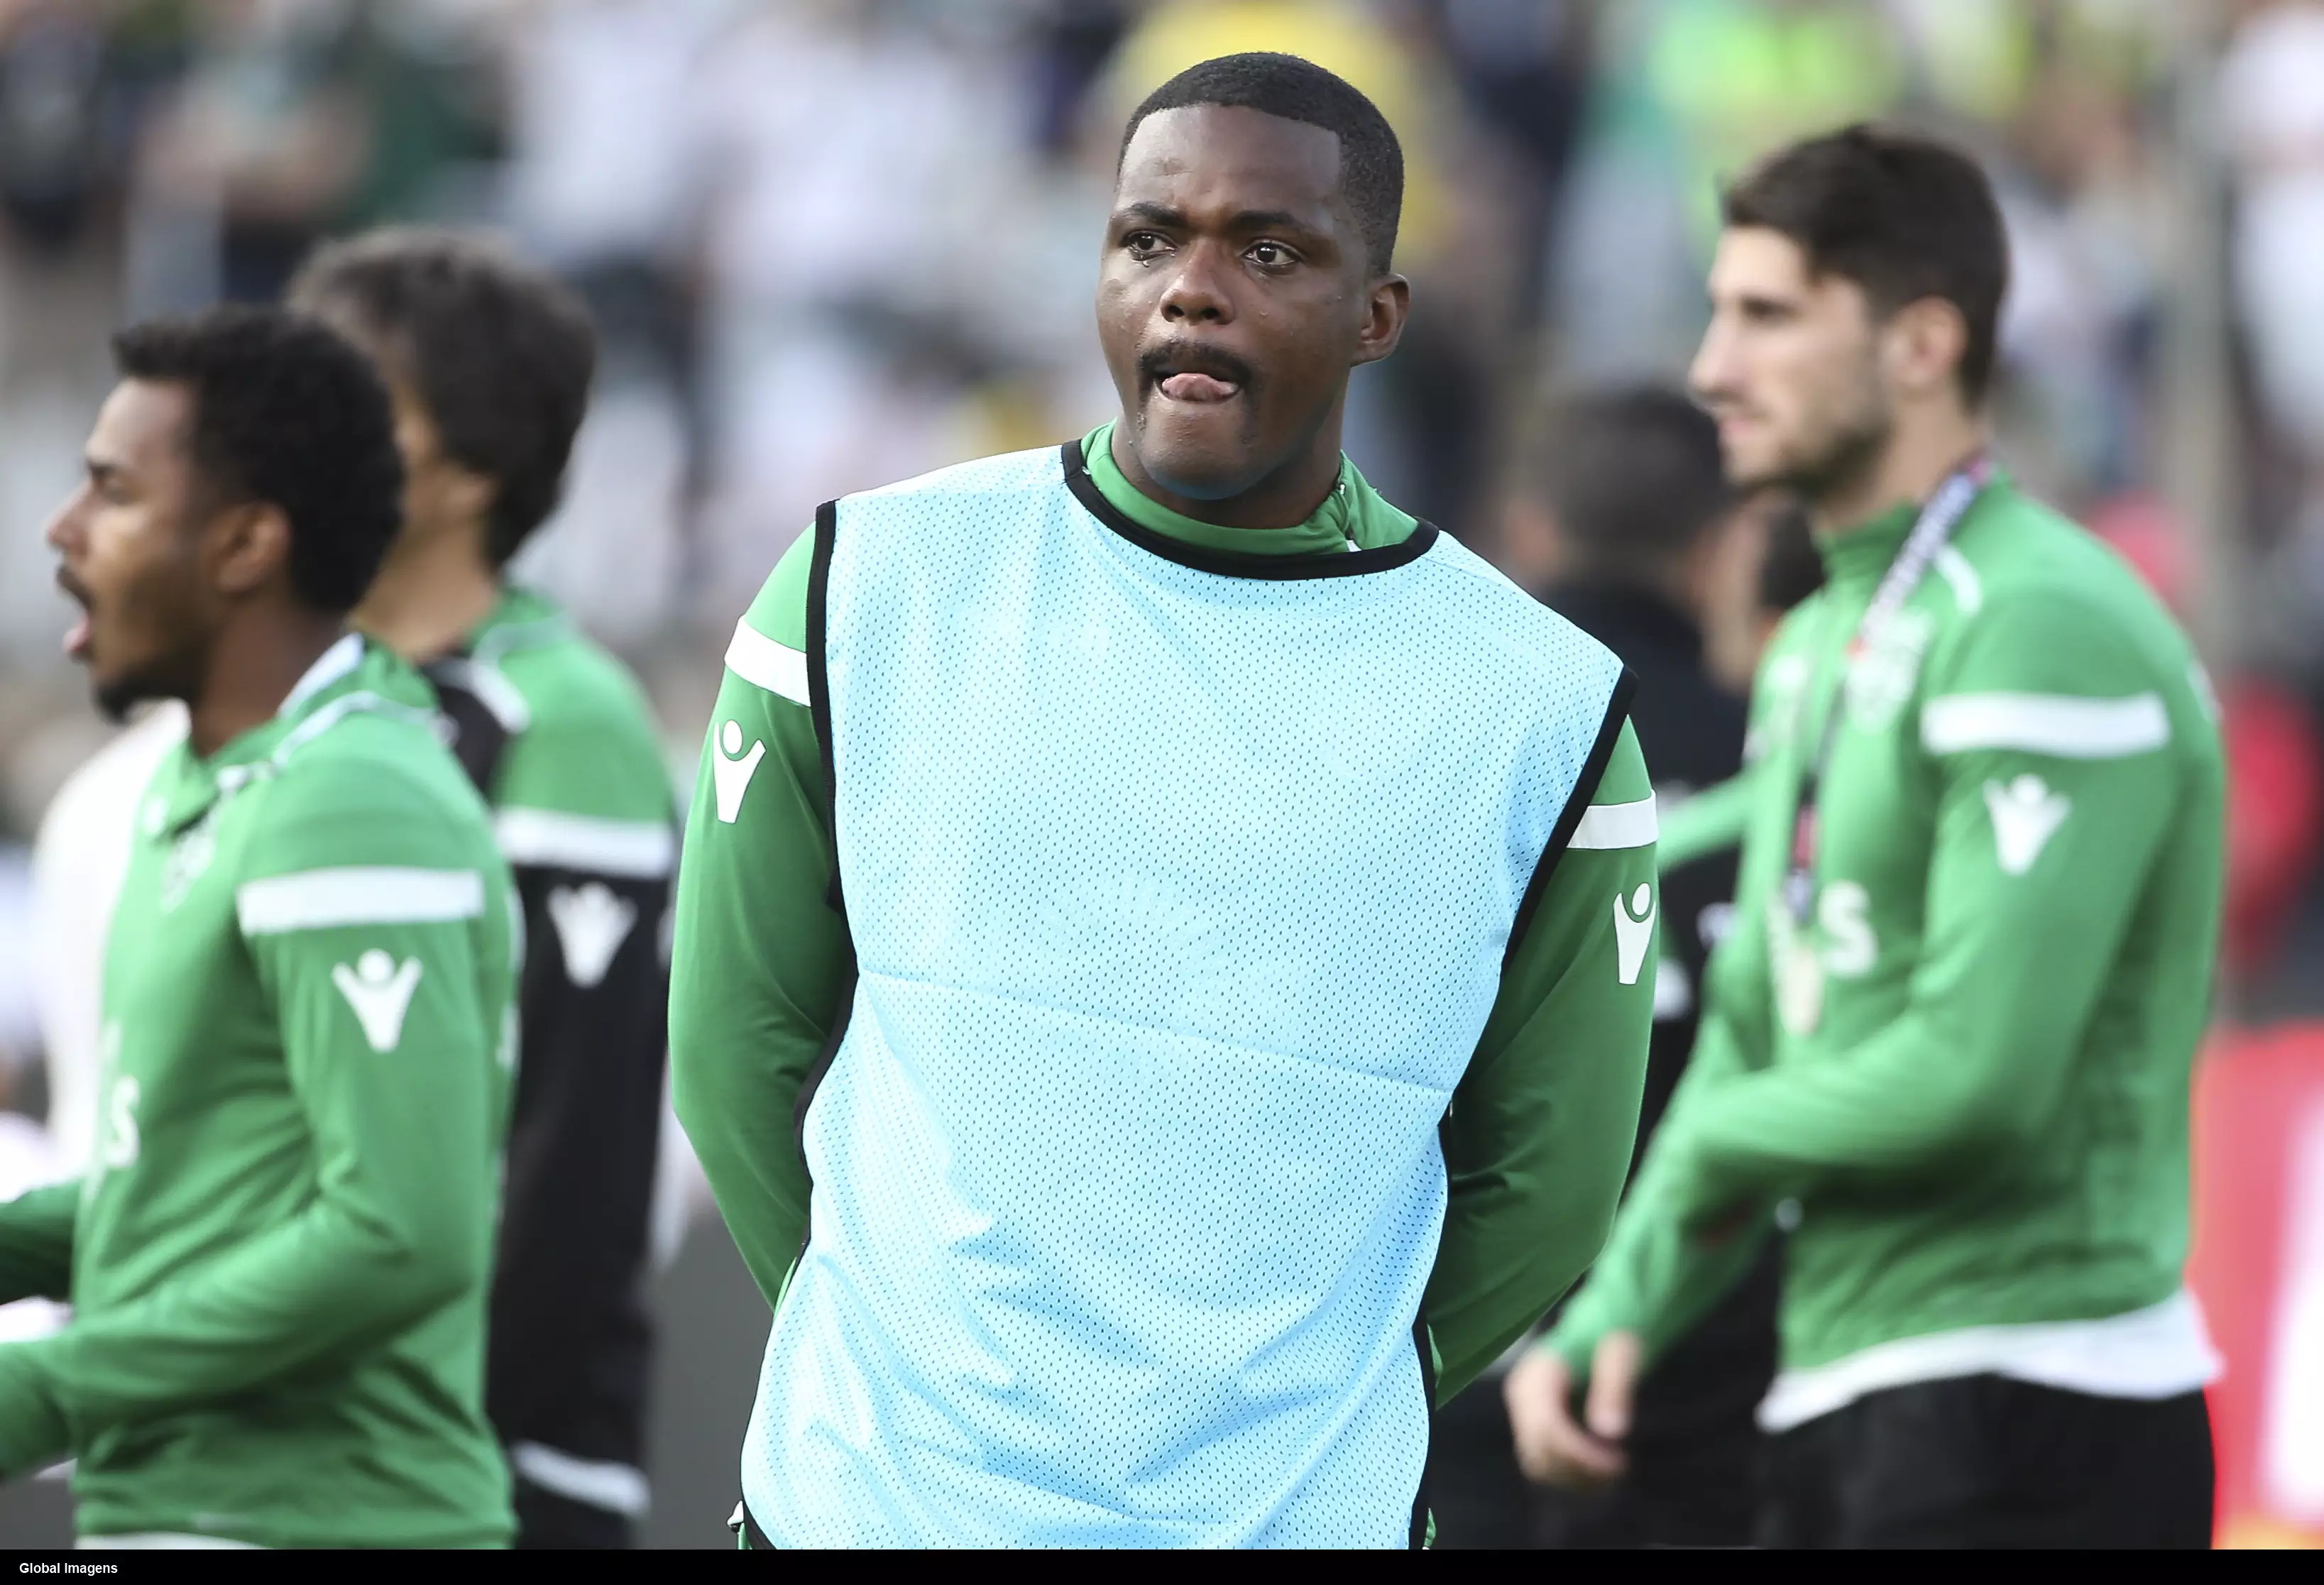 Could Carvalho finally make a move to the Premier League? Image: PA Images